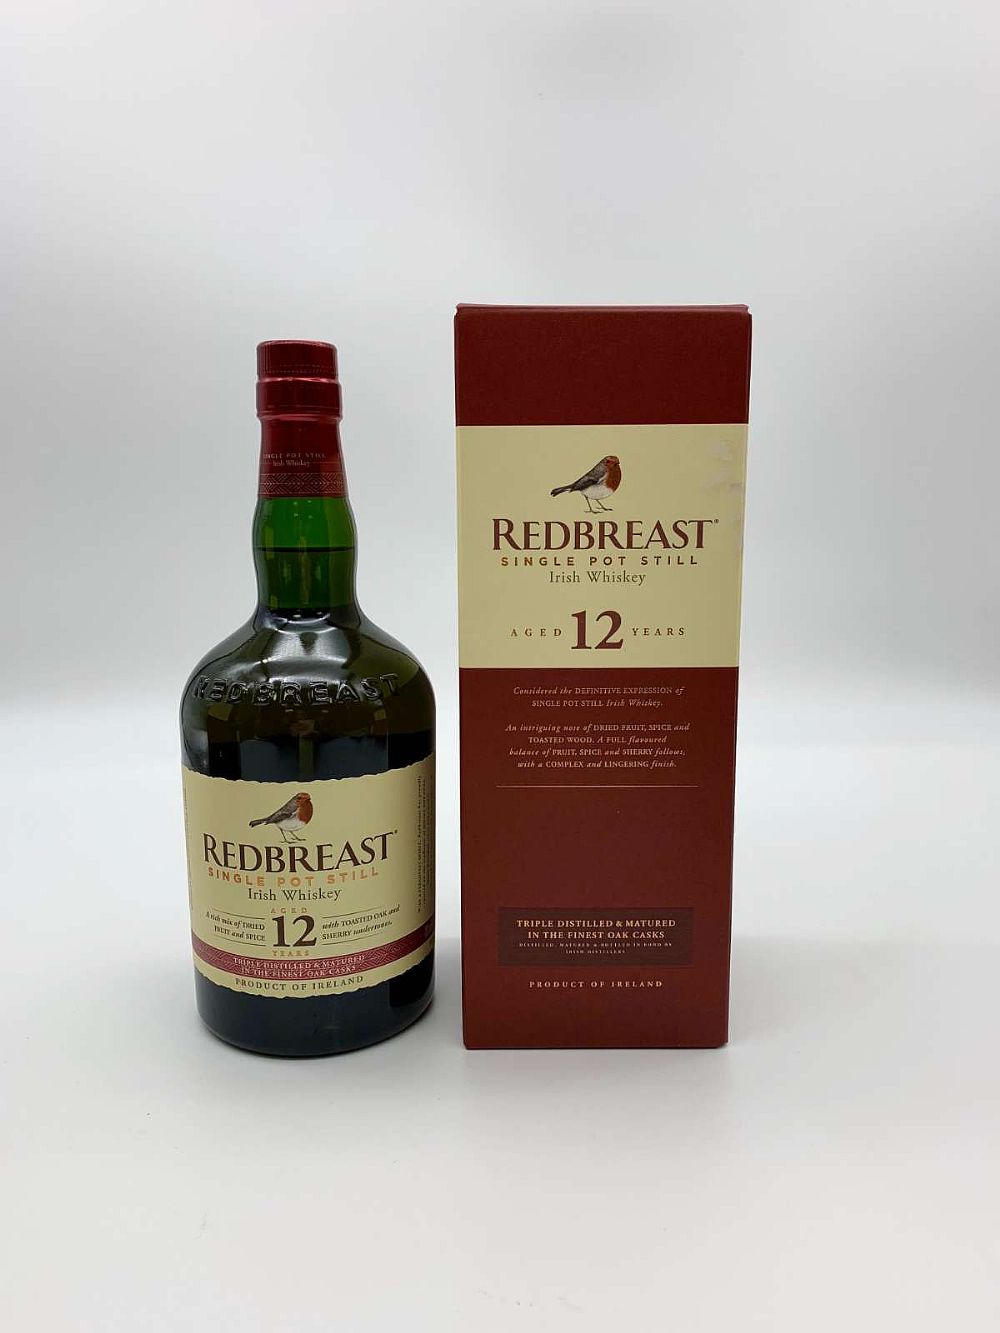 Redbreast 12 year old (new label, 3 bottle case)